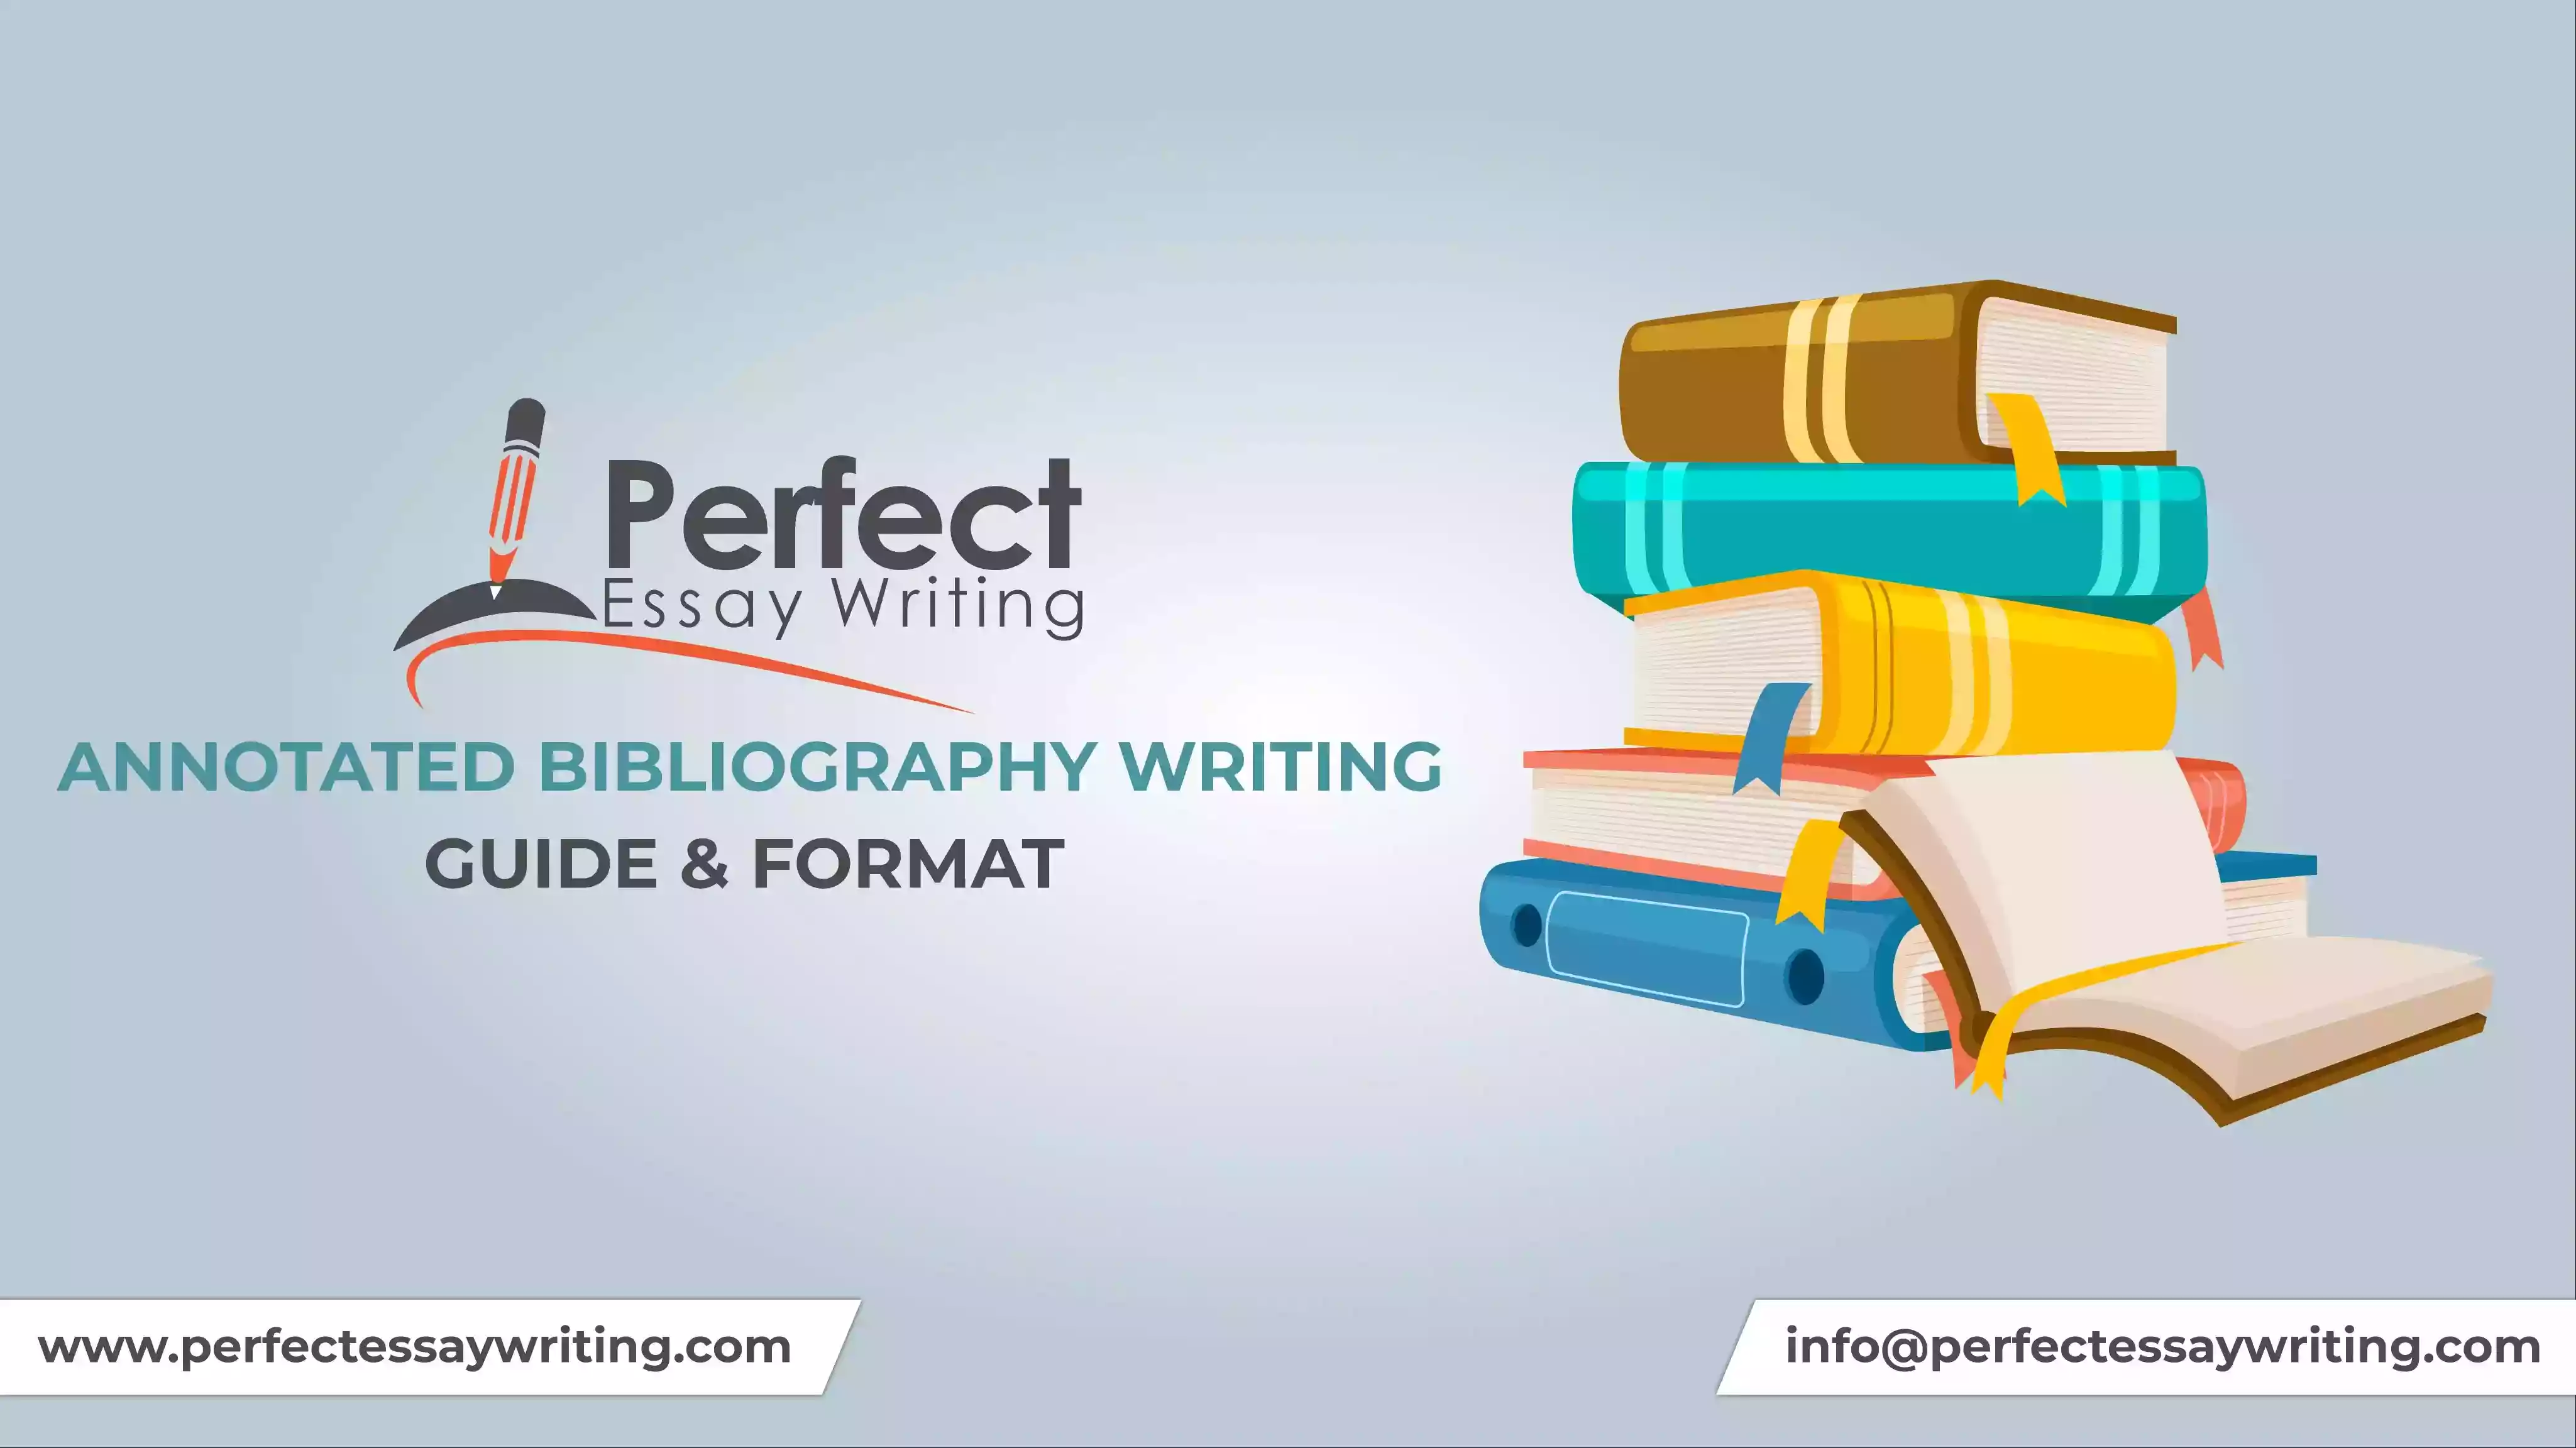 Annotated Bibliography Writing - Writing Guide & Format